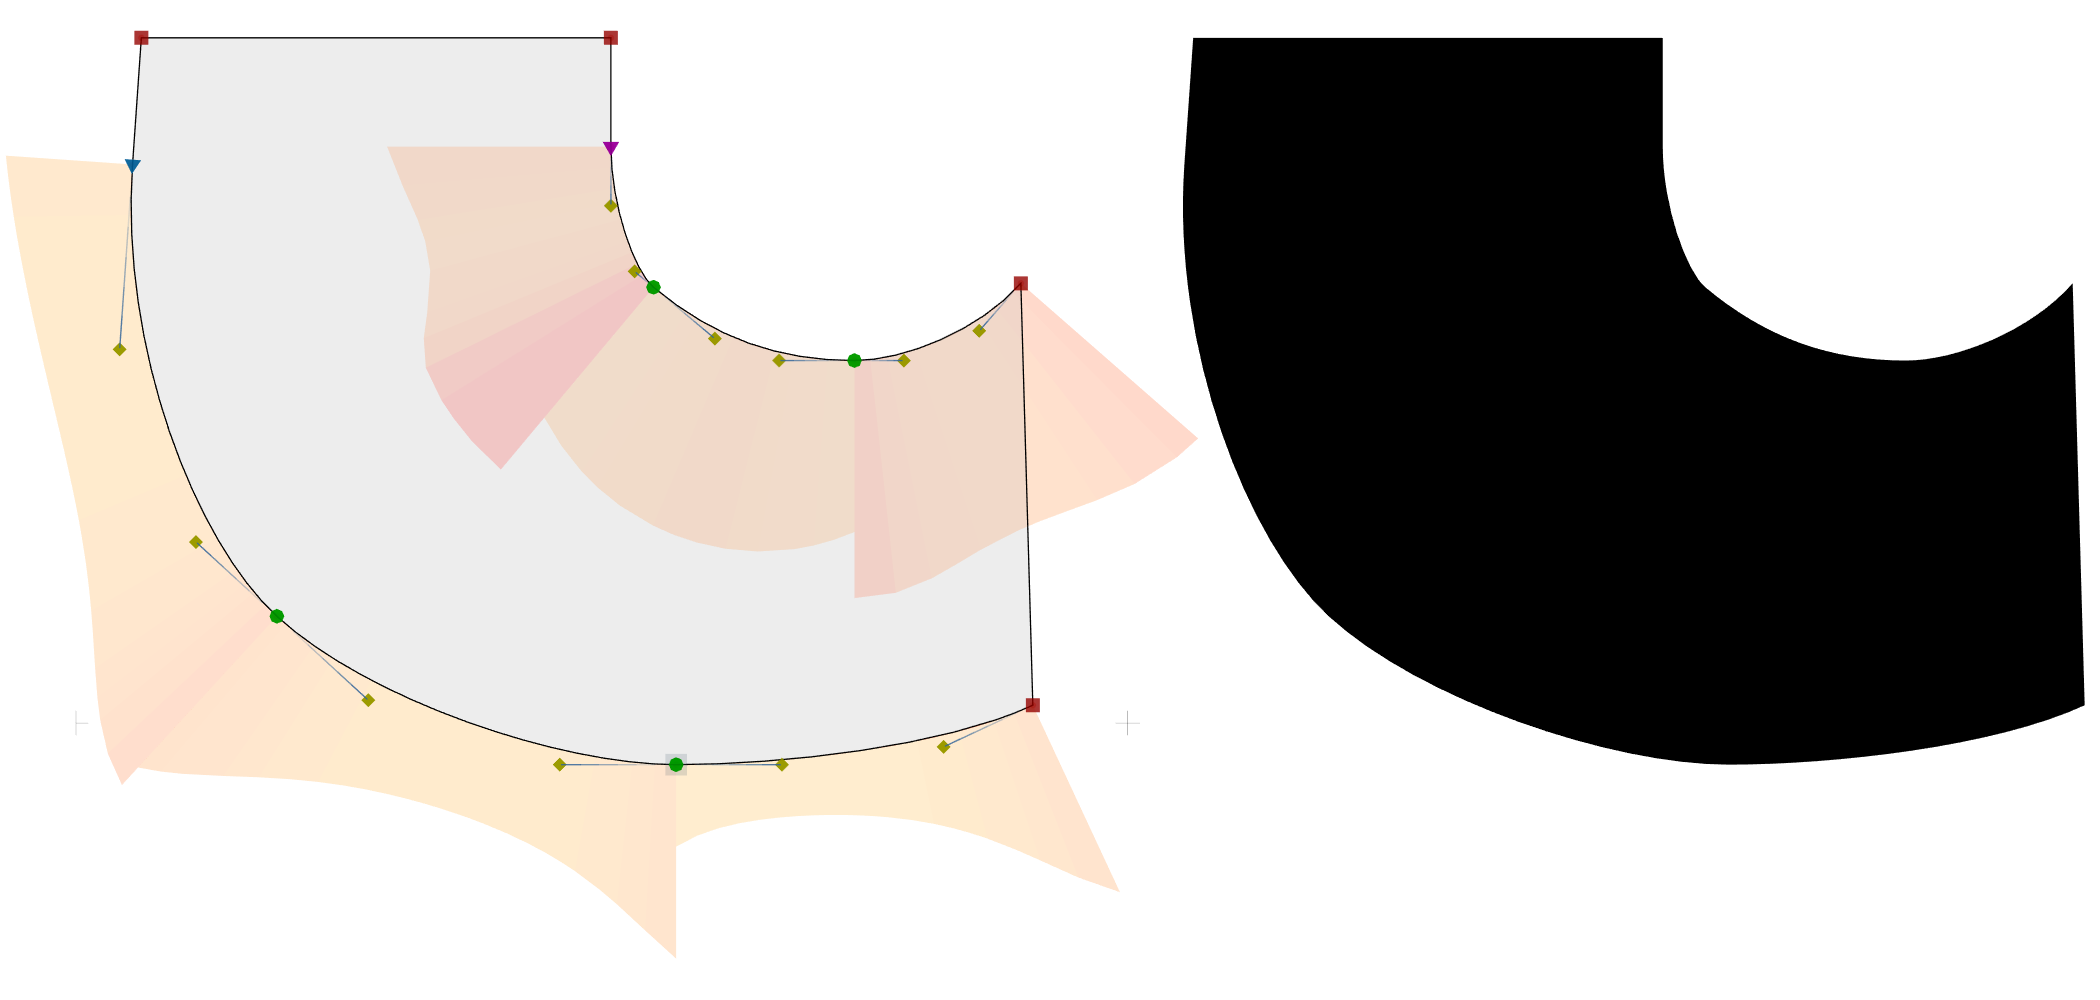 G1 curve continuity: Smooth nodes